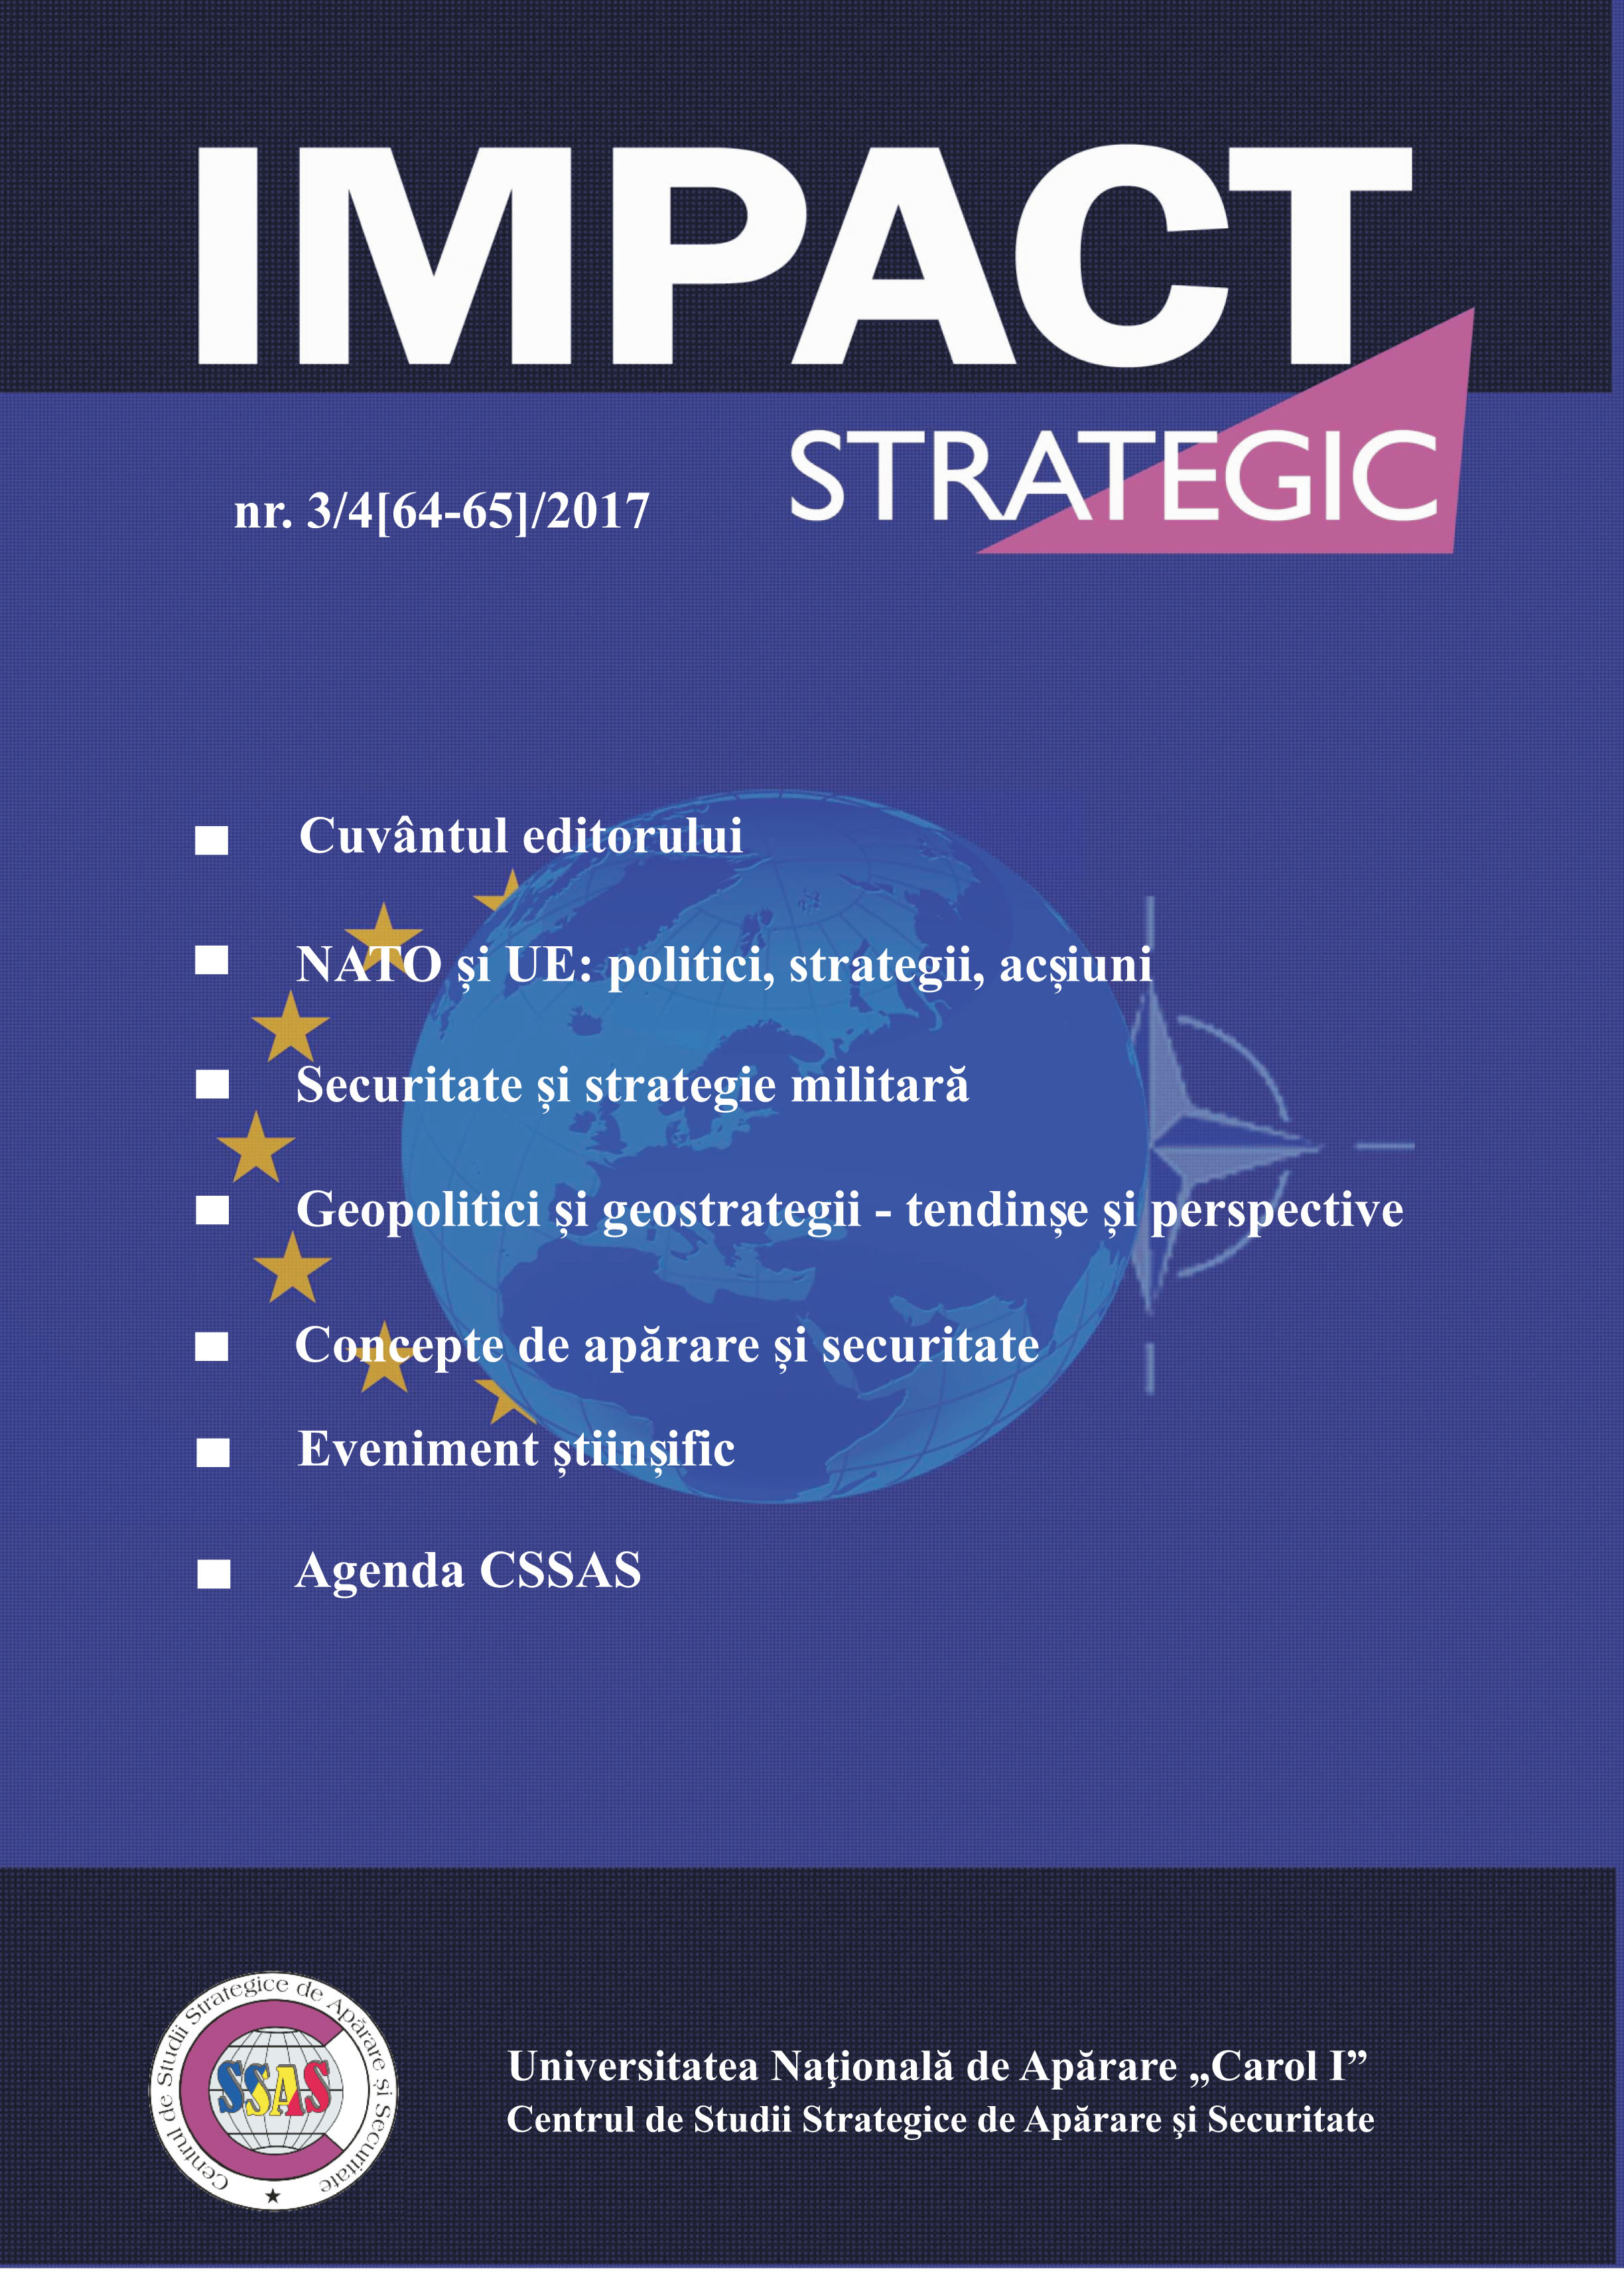 WORKSHOP ON STRATEGY
“Military Sciences - Security Sciences - Conceptual Landmarks”- October 19, 2017 - Cover Image